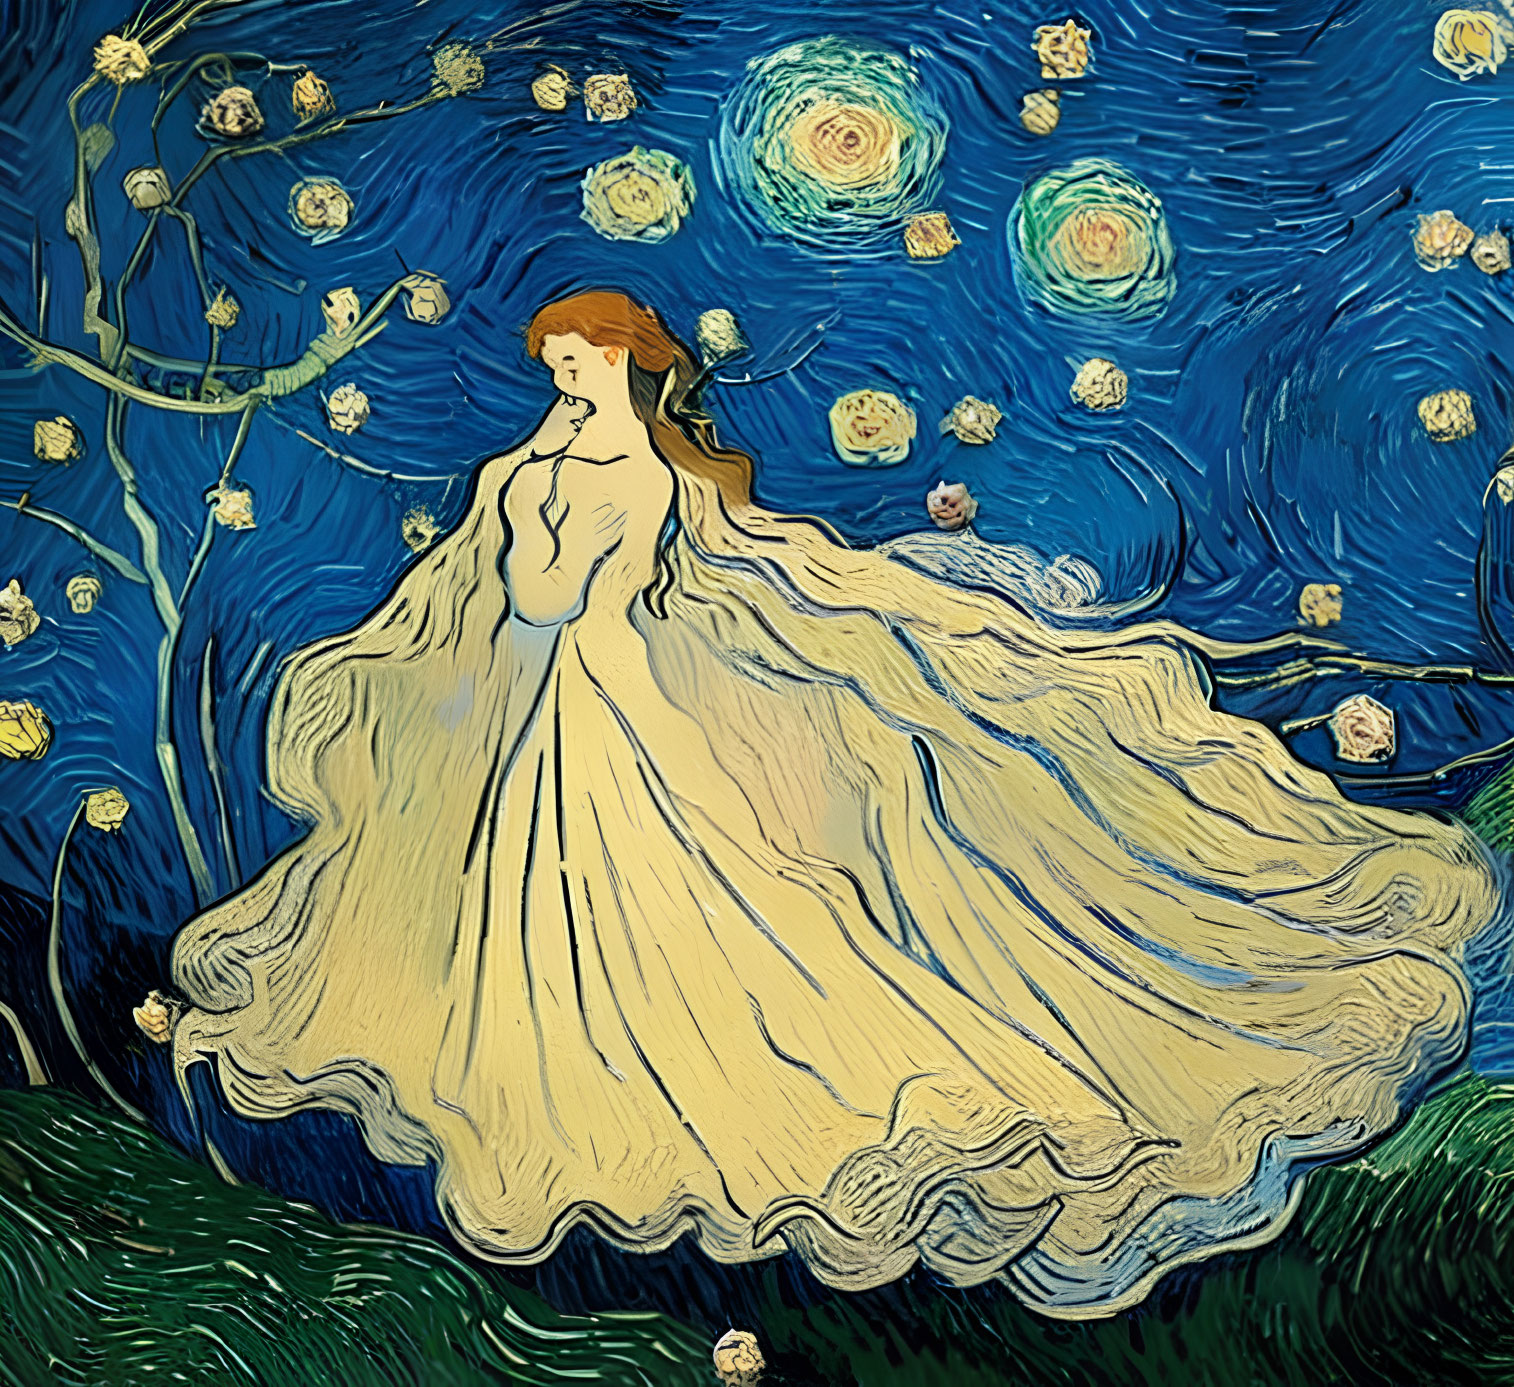 Stylized illustration of woman in flowing dress with swirling blues and stars